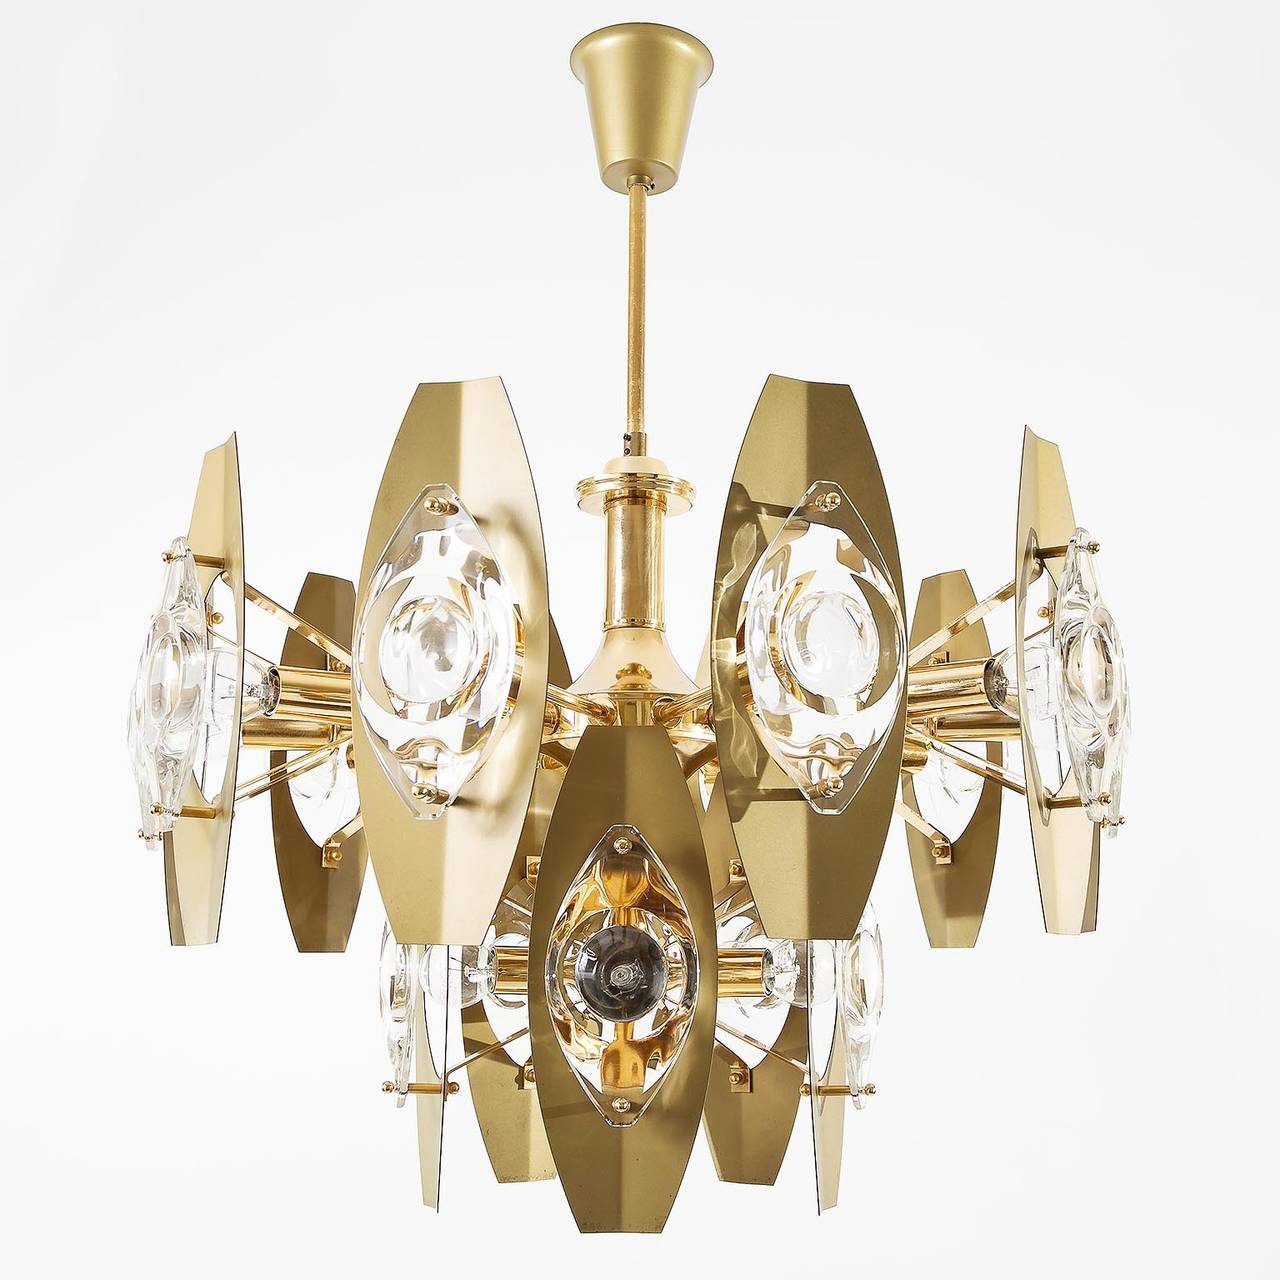 Two stunning and beautiful chandeliers by Gaetano Sciolari, Italy, manufactured in Mid-Century, circa 1970 (end of 1960s and beginning of 1970s). Each chandelier has 15 arms which hold large glass lenses and sockets for small base bulbs E14 with 40W